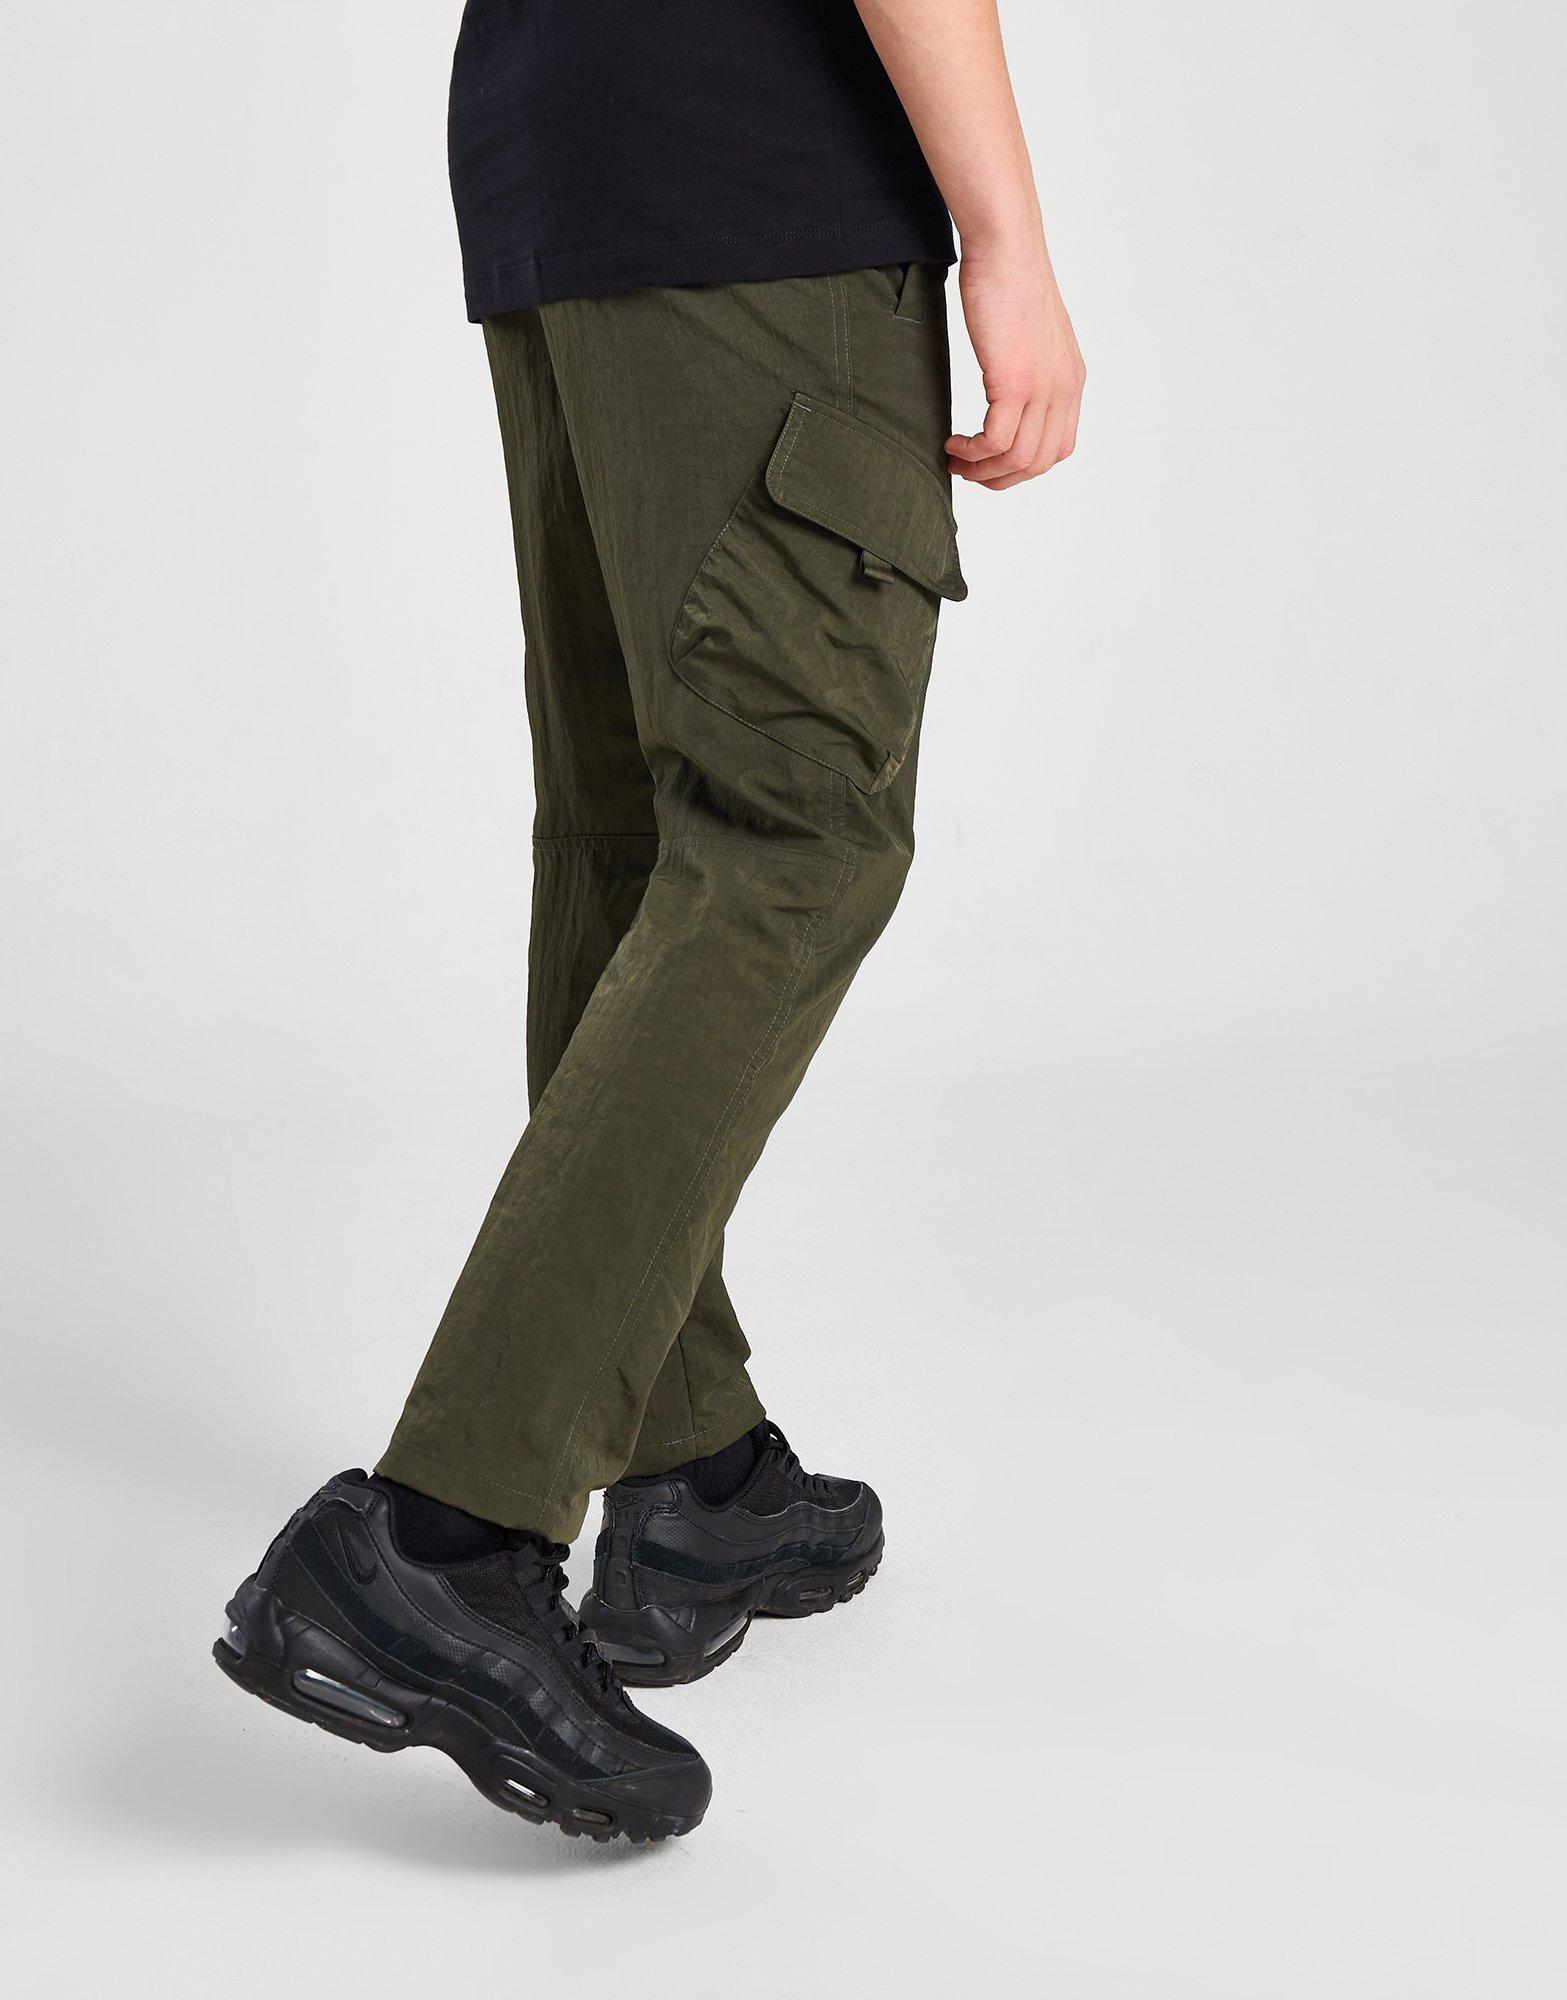 Gym King Utility Woven Cargo Pant - Olive – GYM KING